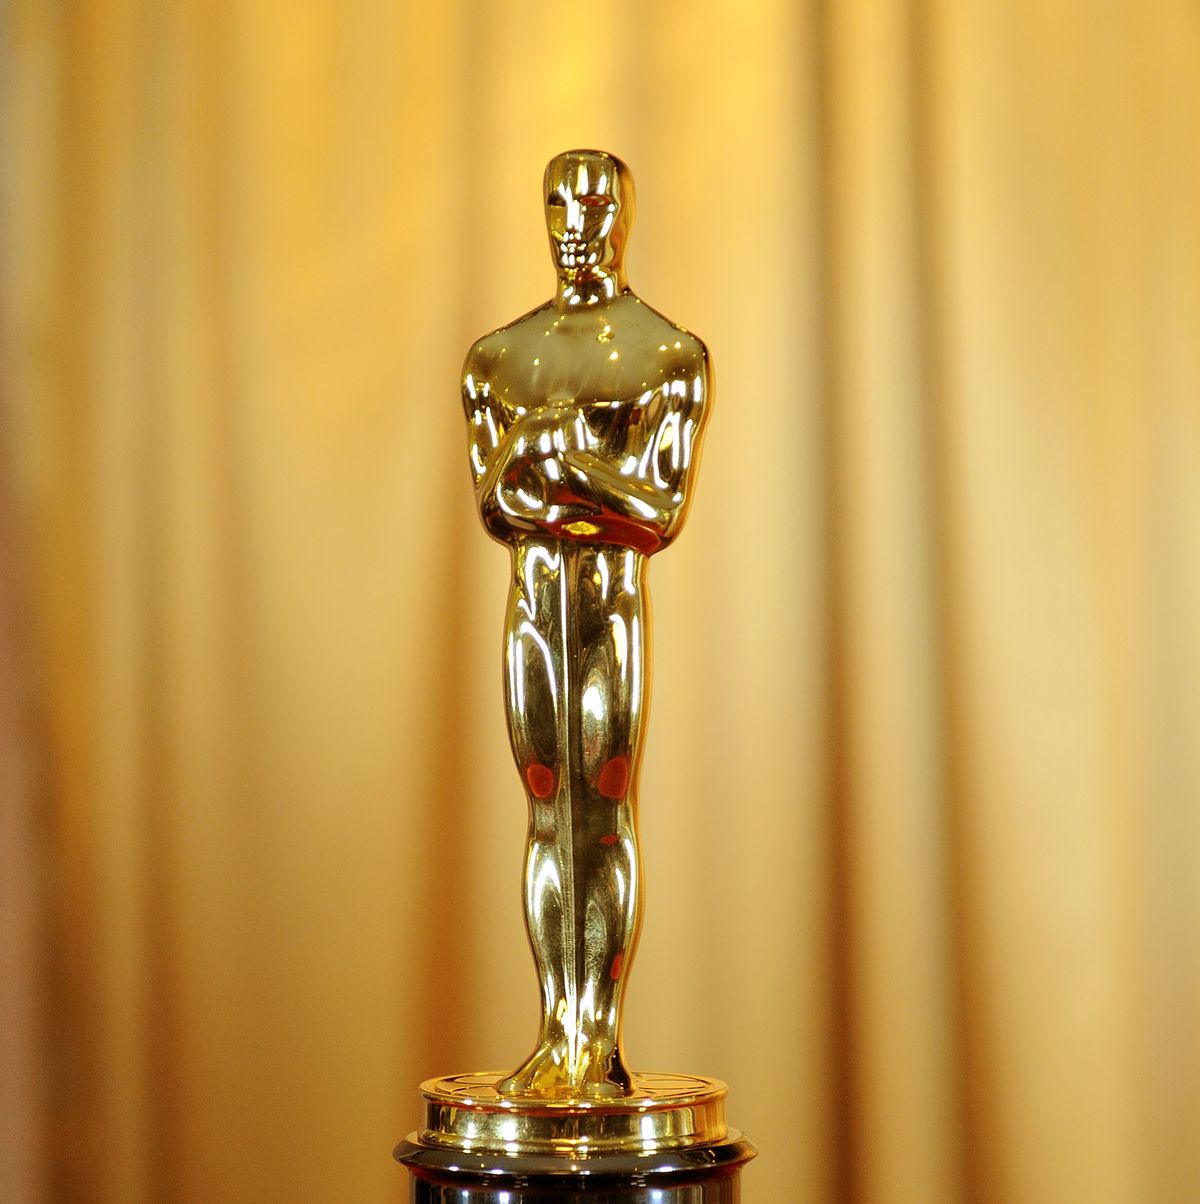 Who Is Hosting the Oscars 2021? Here's What We Know